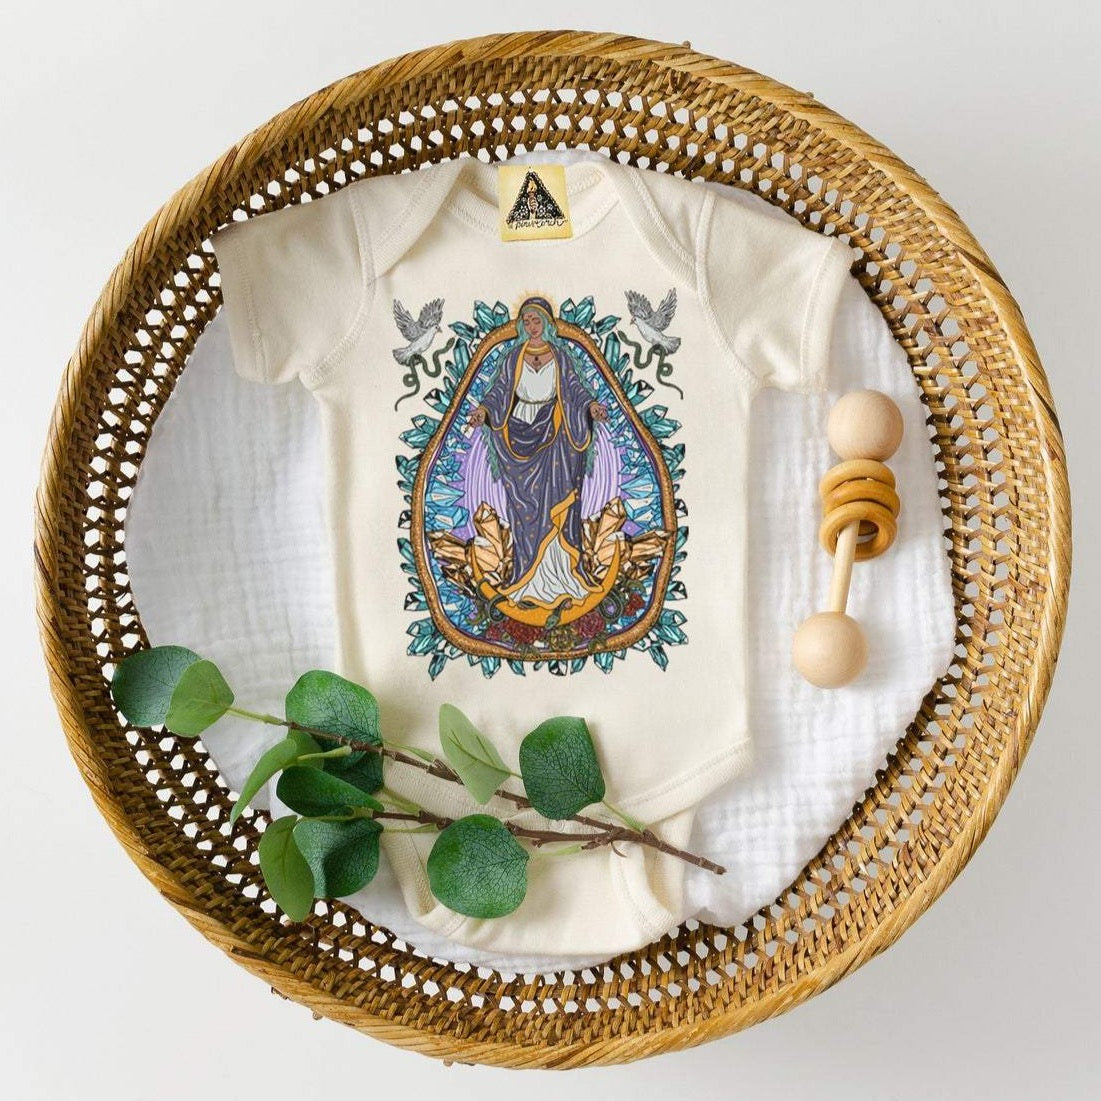 « VIRGIN MARY / GUADALUPE WITH CRYSTALS »  BODYSUIT